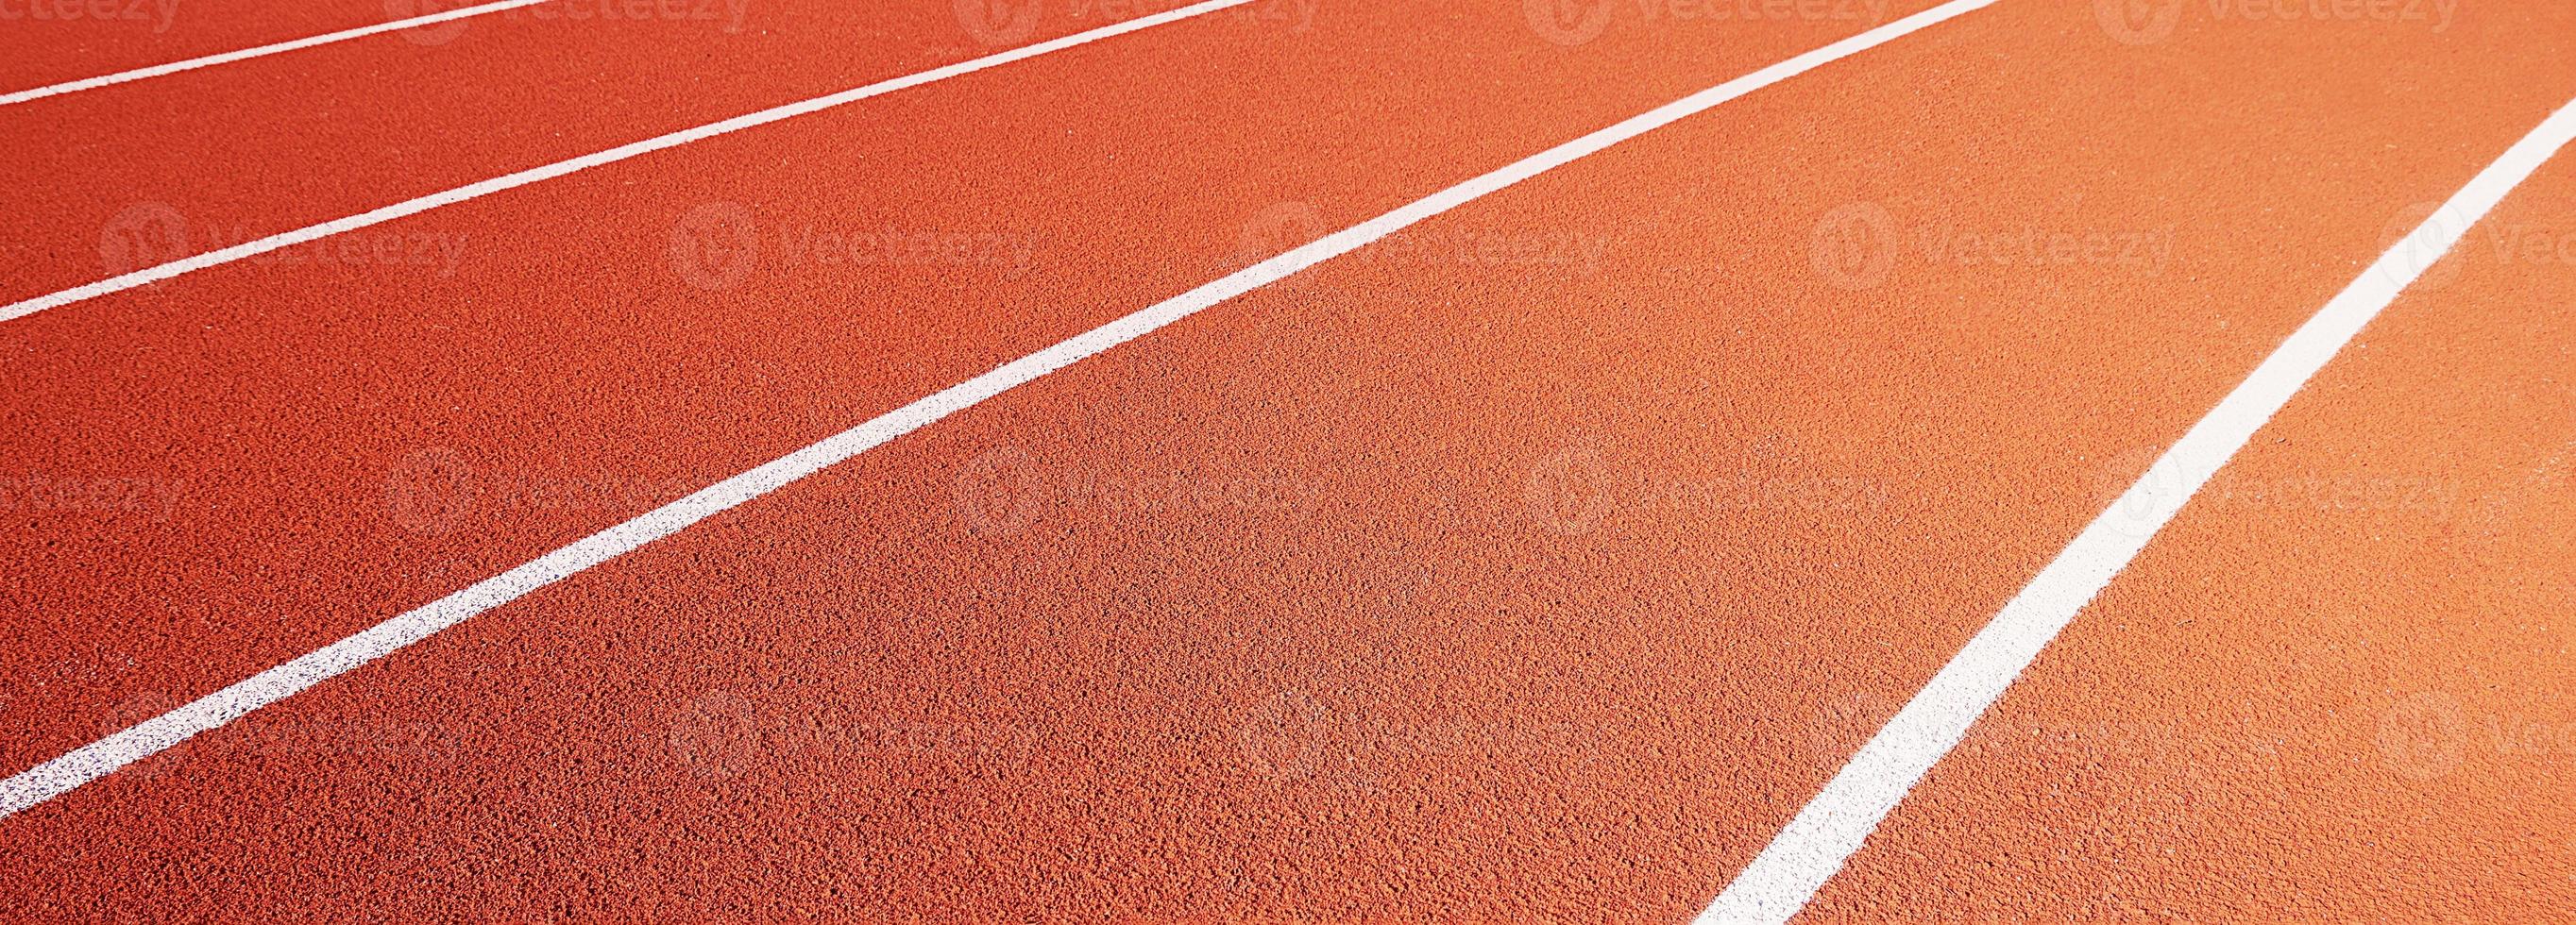 Red running track at stadium with border lanes photo